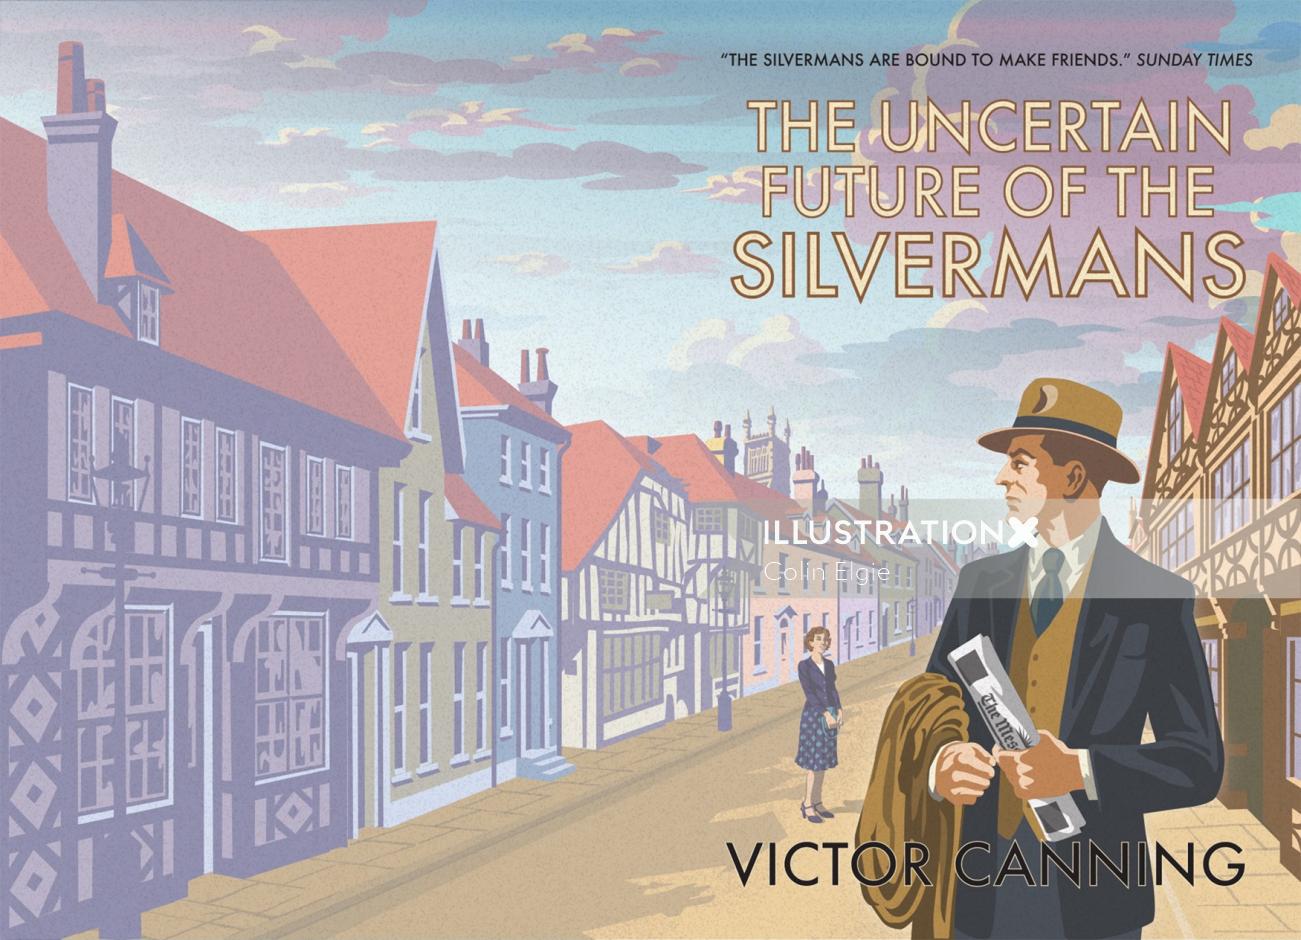 Fifties-style book cover of "The Uncertain Future of the Silvermans"